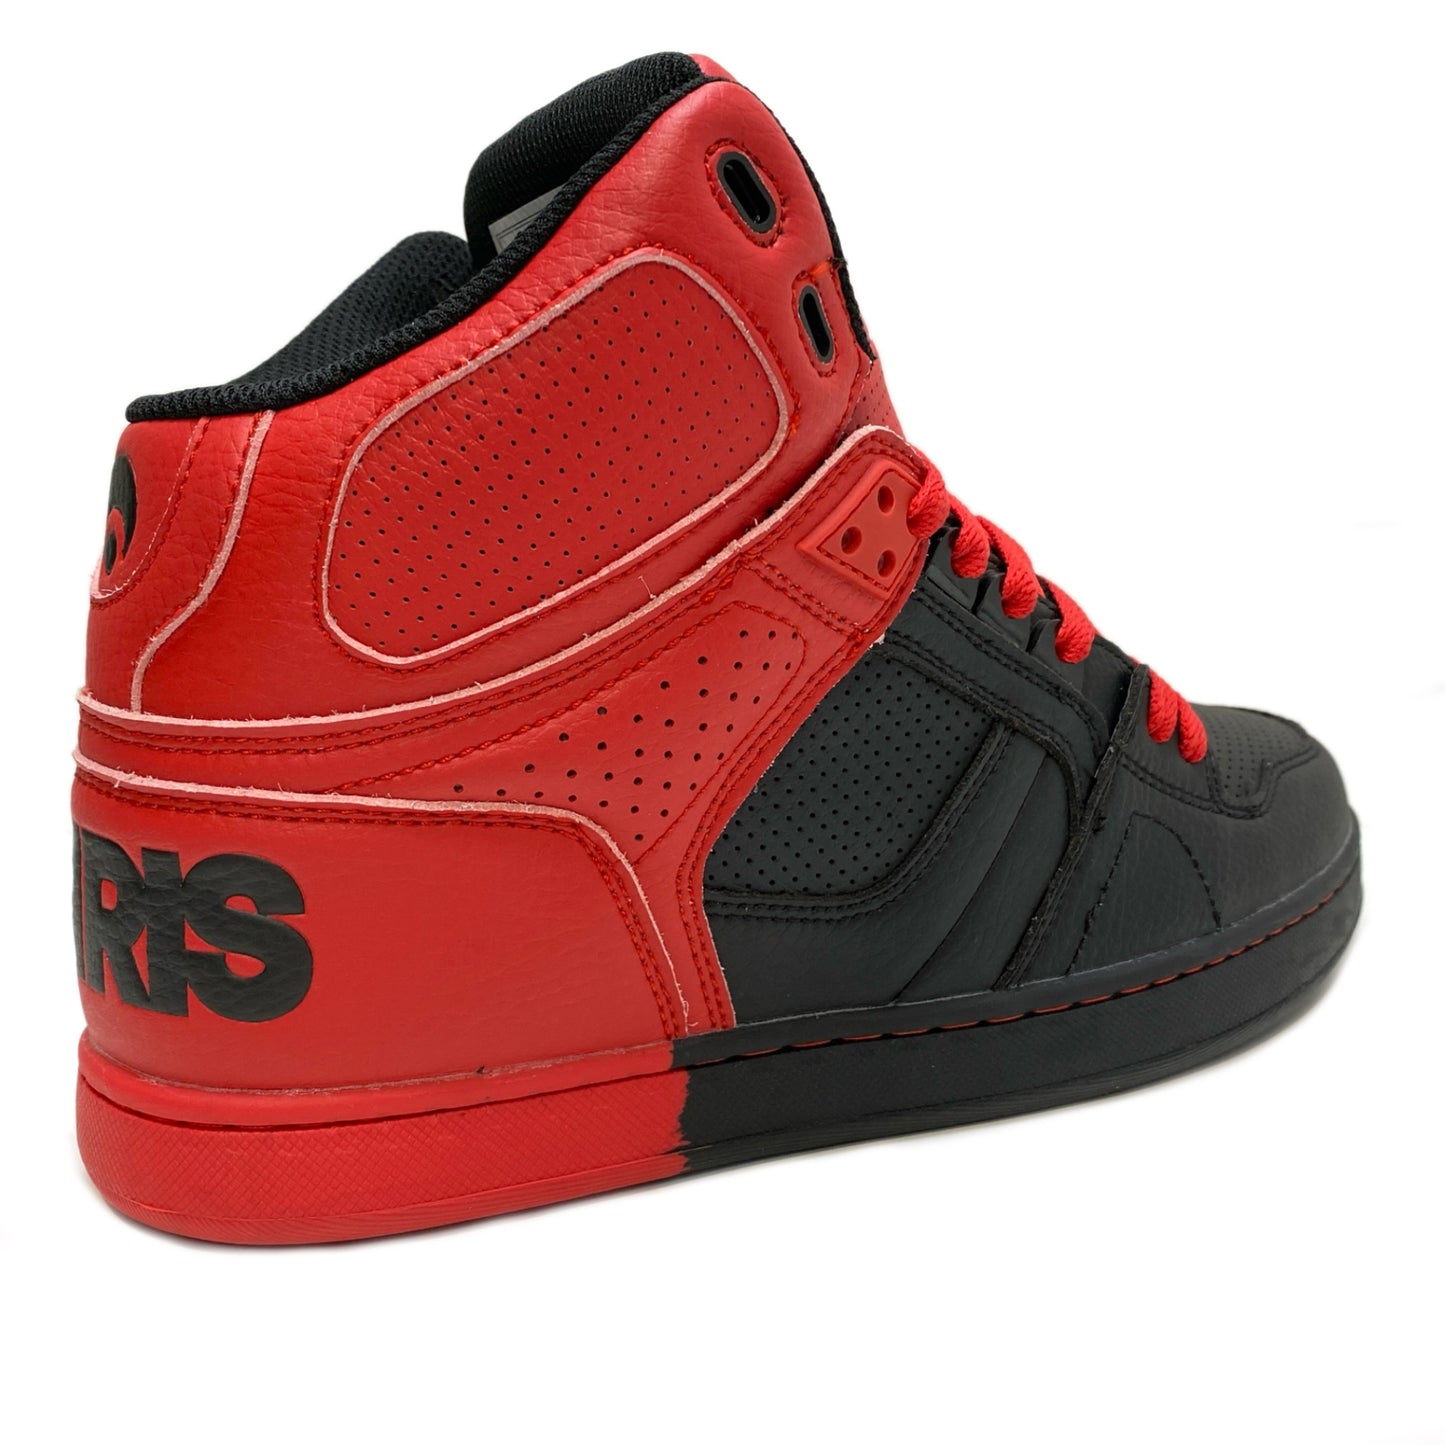 OSIRIS SHOES NYC 83 CLK BLACK RED DIP TRAINERS